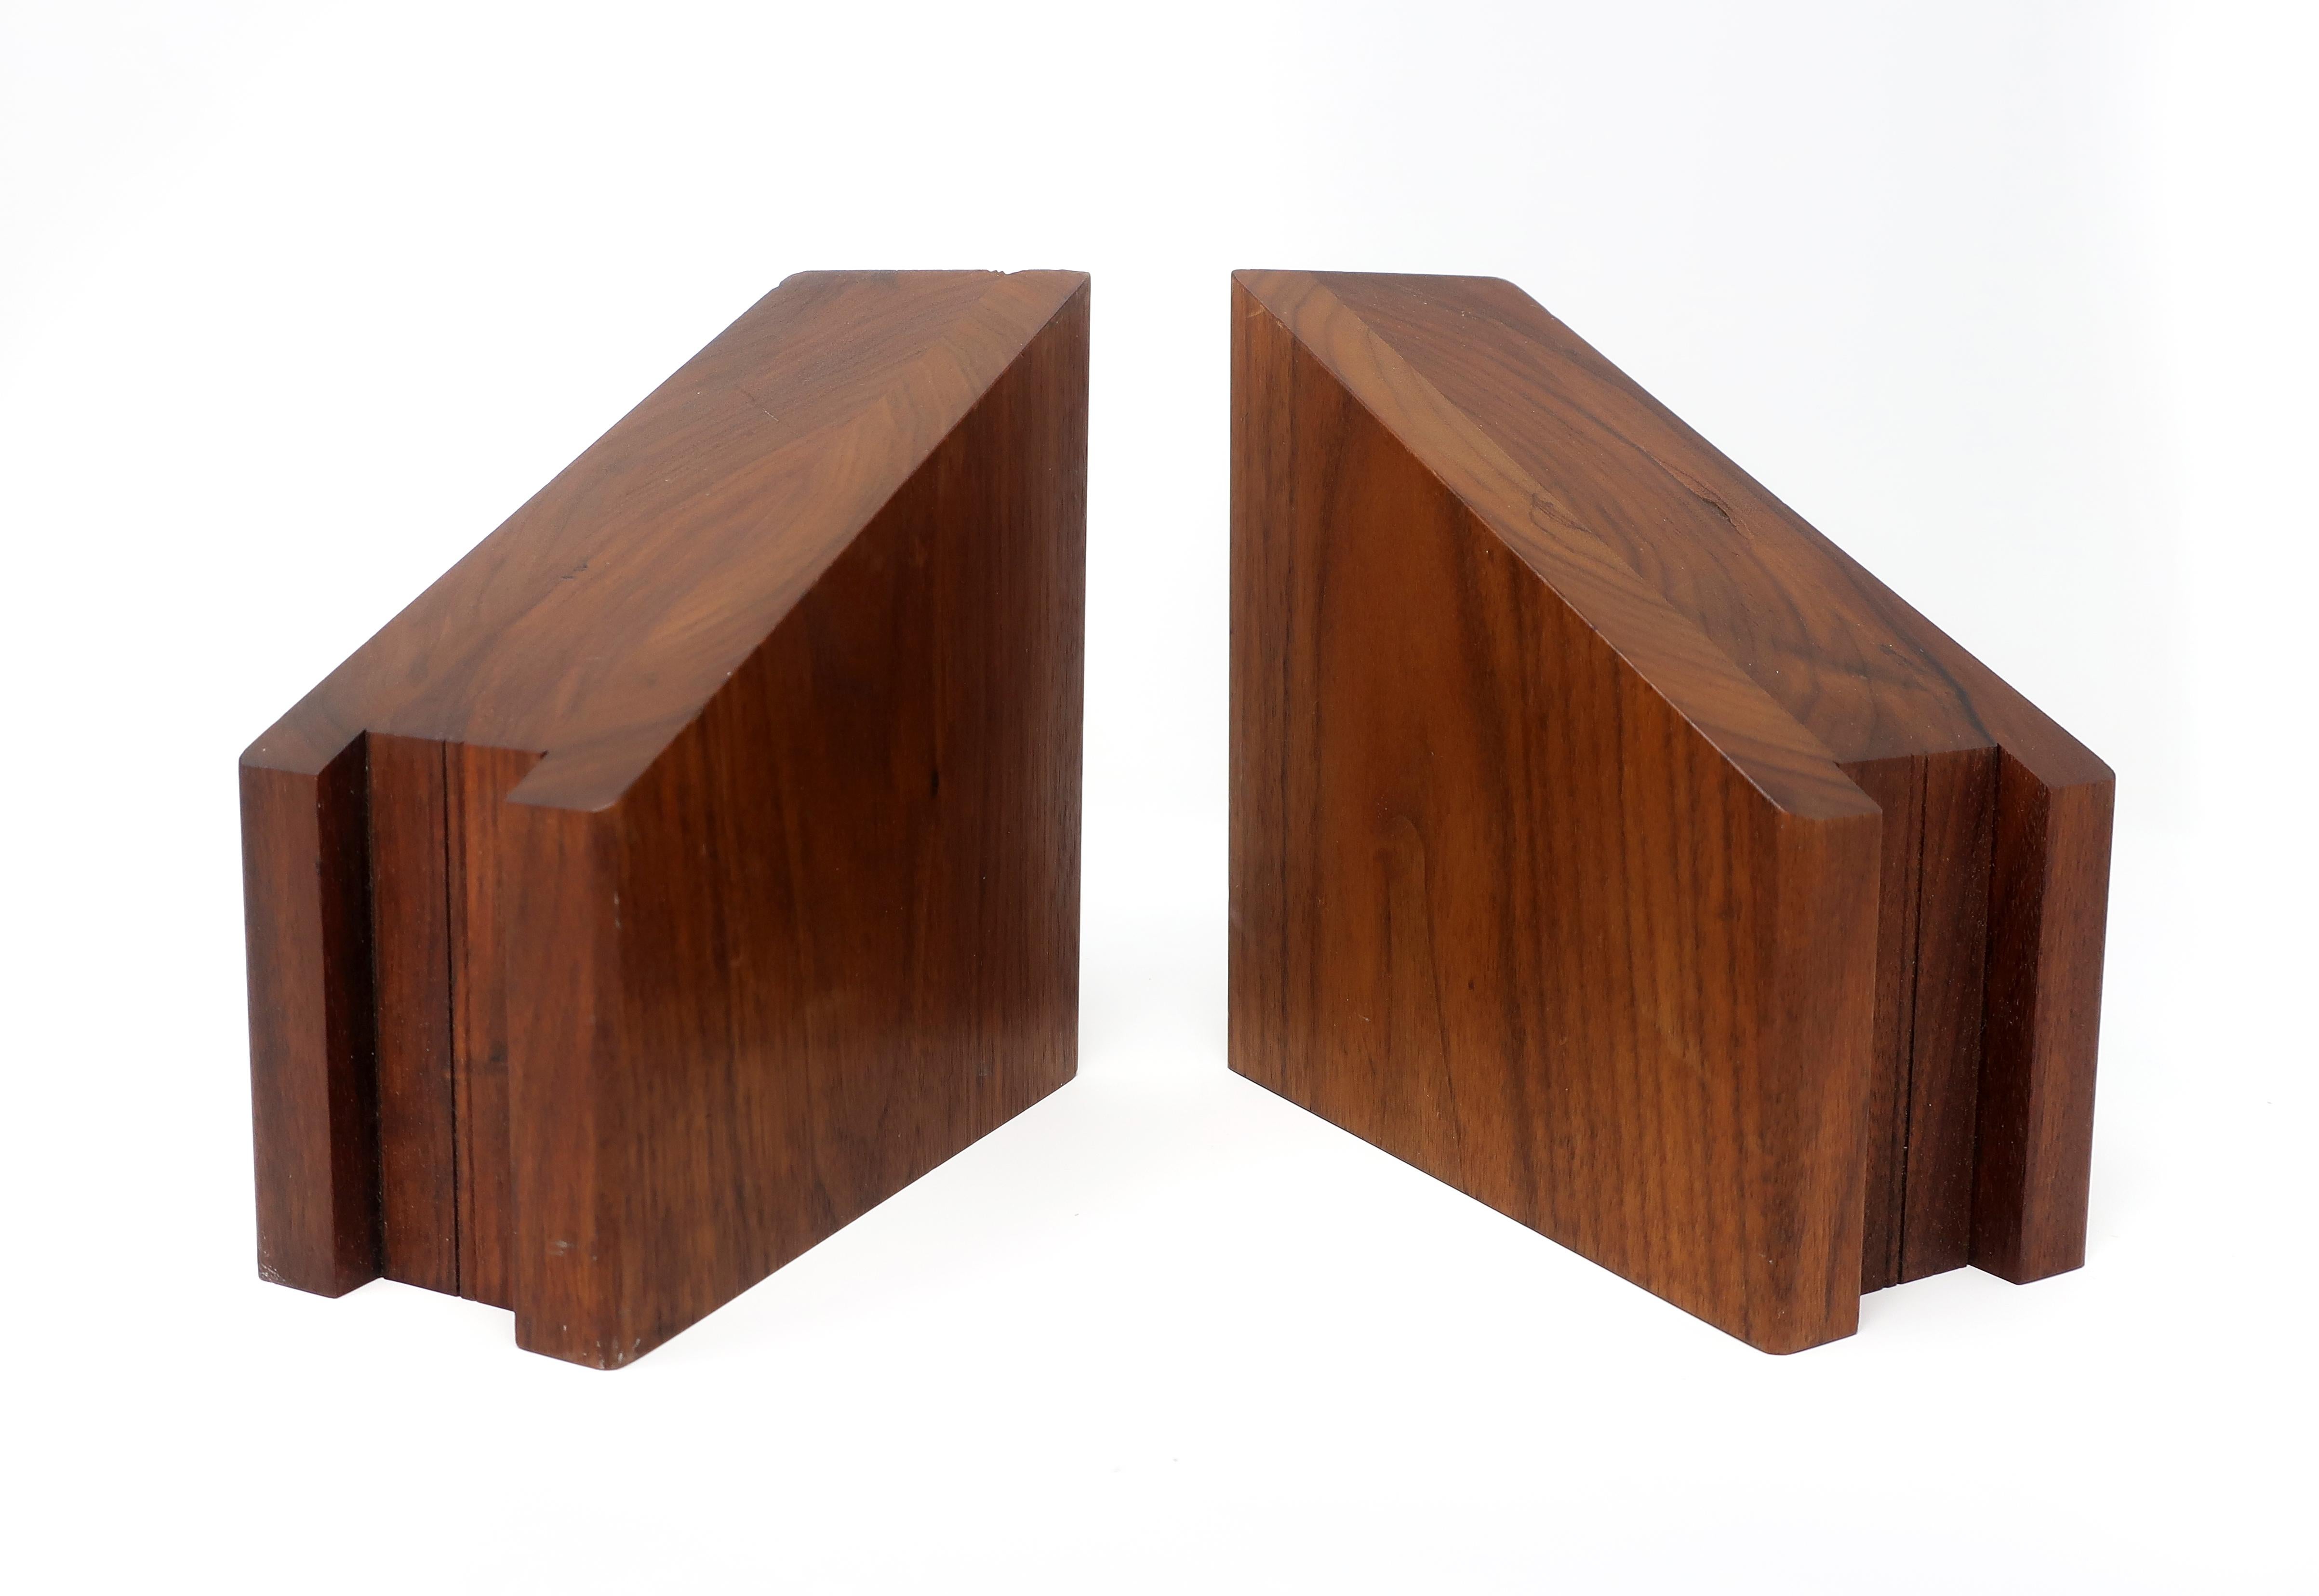 A pair of Mid-Century Modern walnut bookends with one angled side and one with a channel cut into it. With two flat sides, these can be positioned to have the channeled side up or down. In good vintage condition with some wear consistent with age